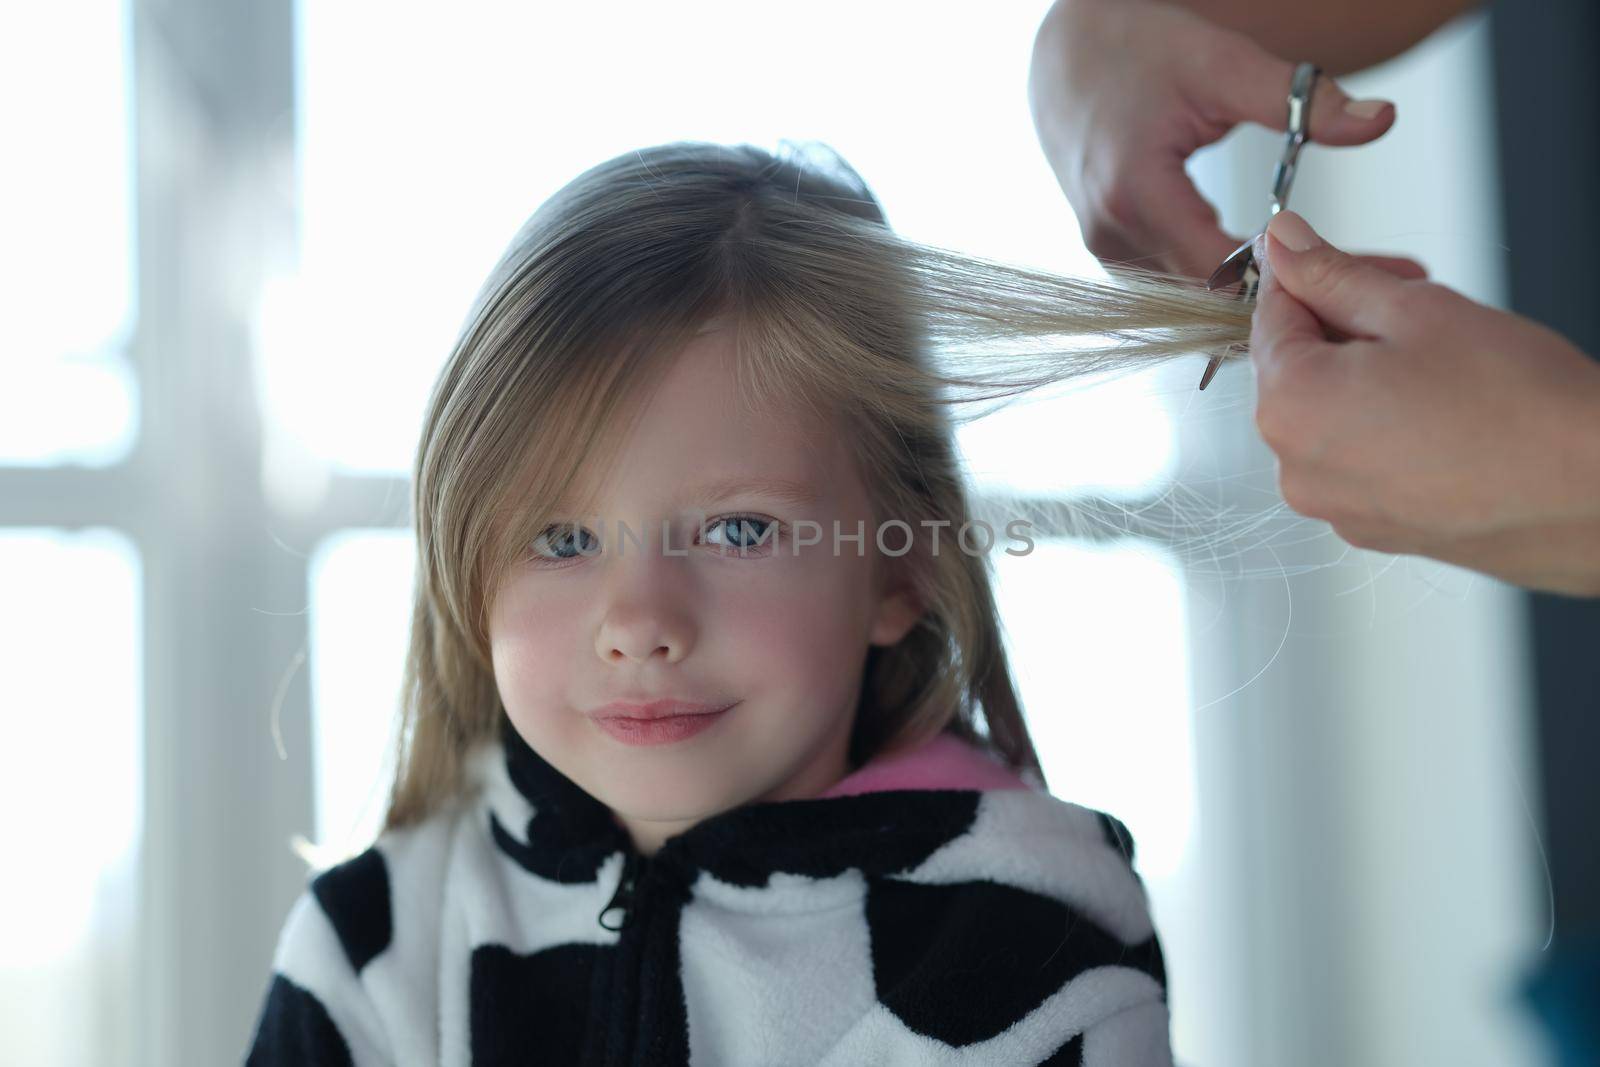 Sweet little girl cutting a lock of hair by kuprevich